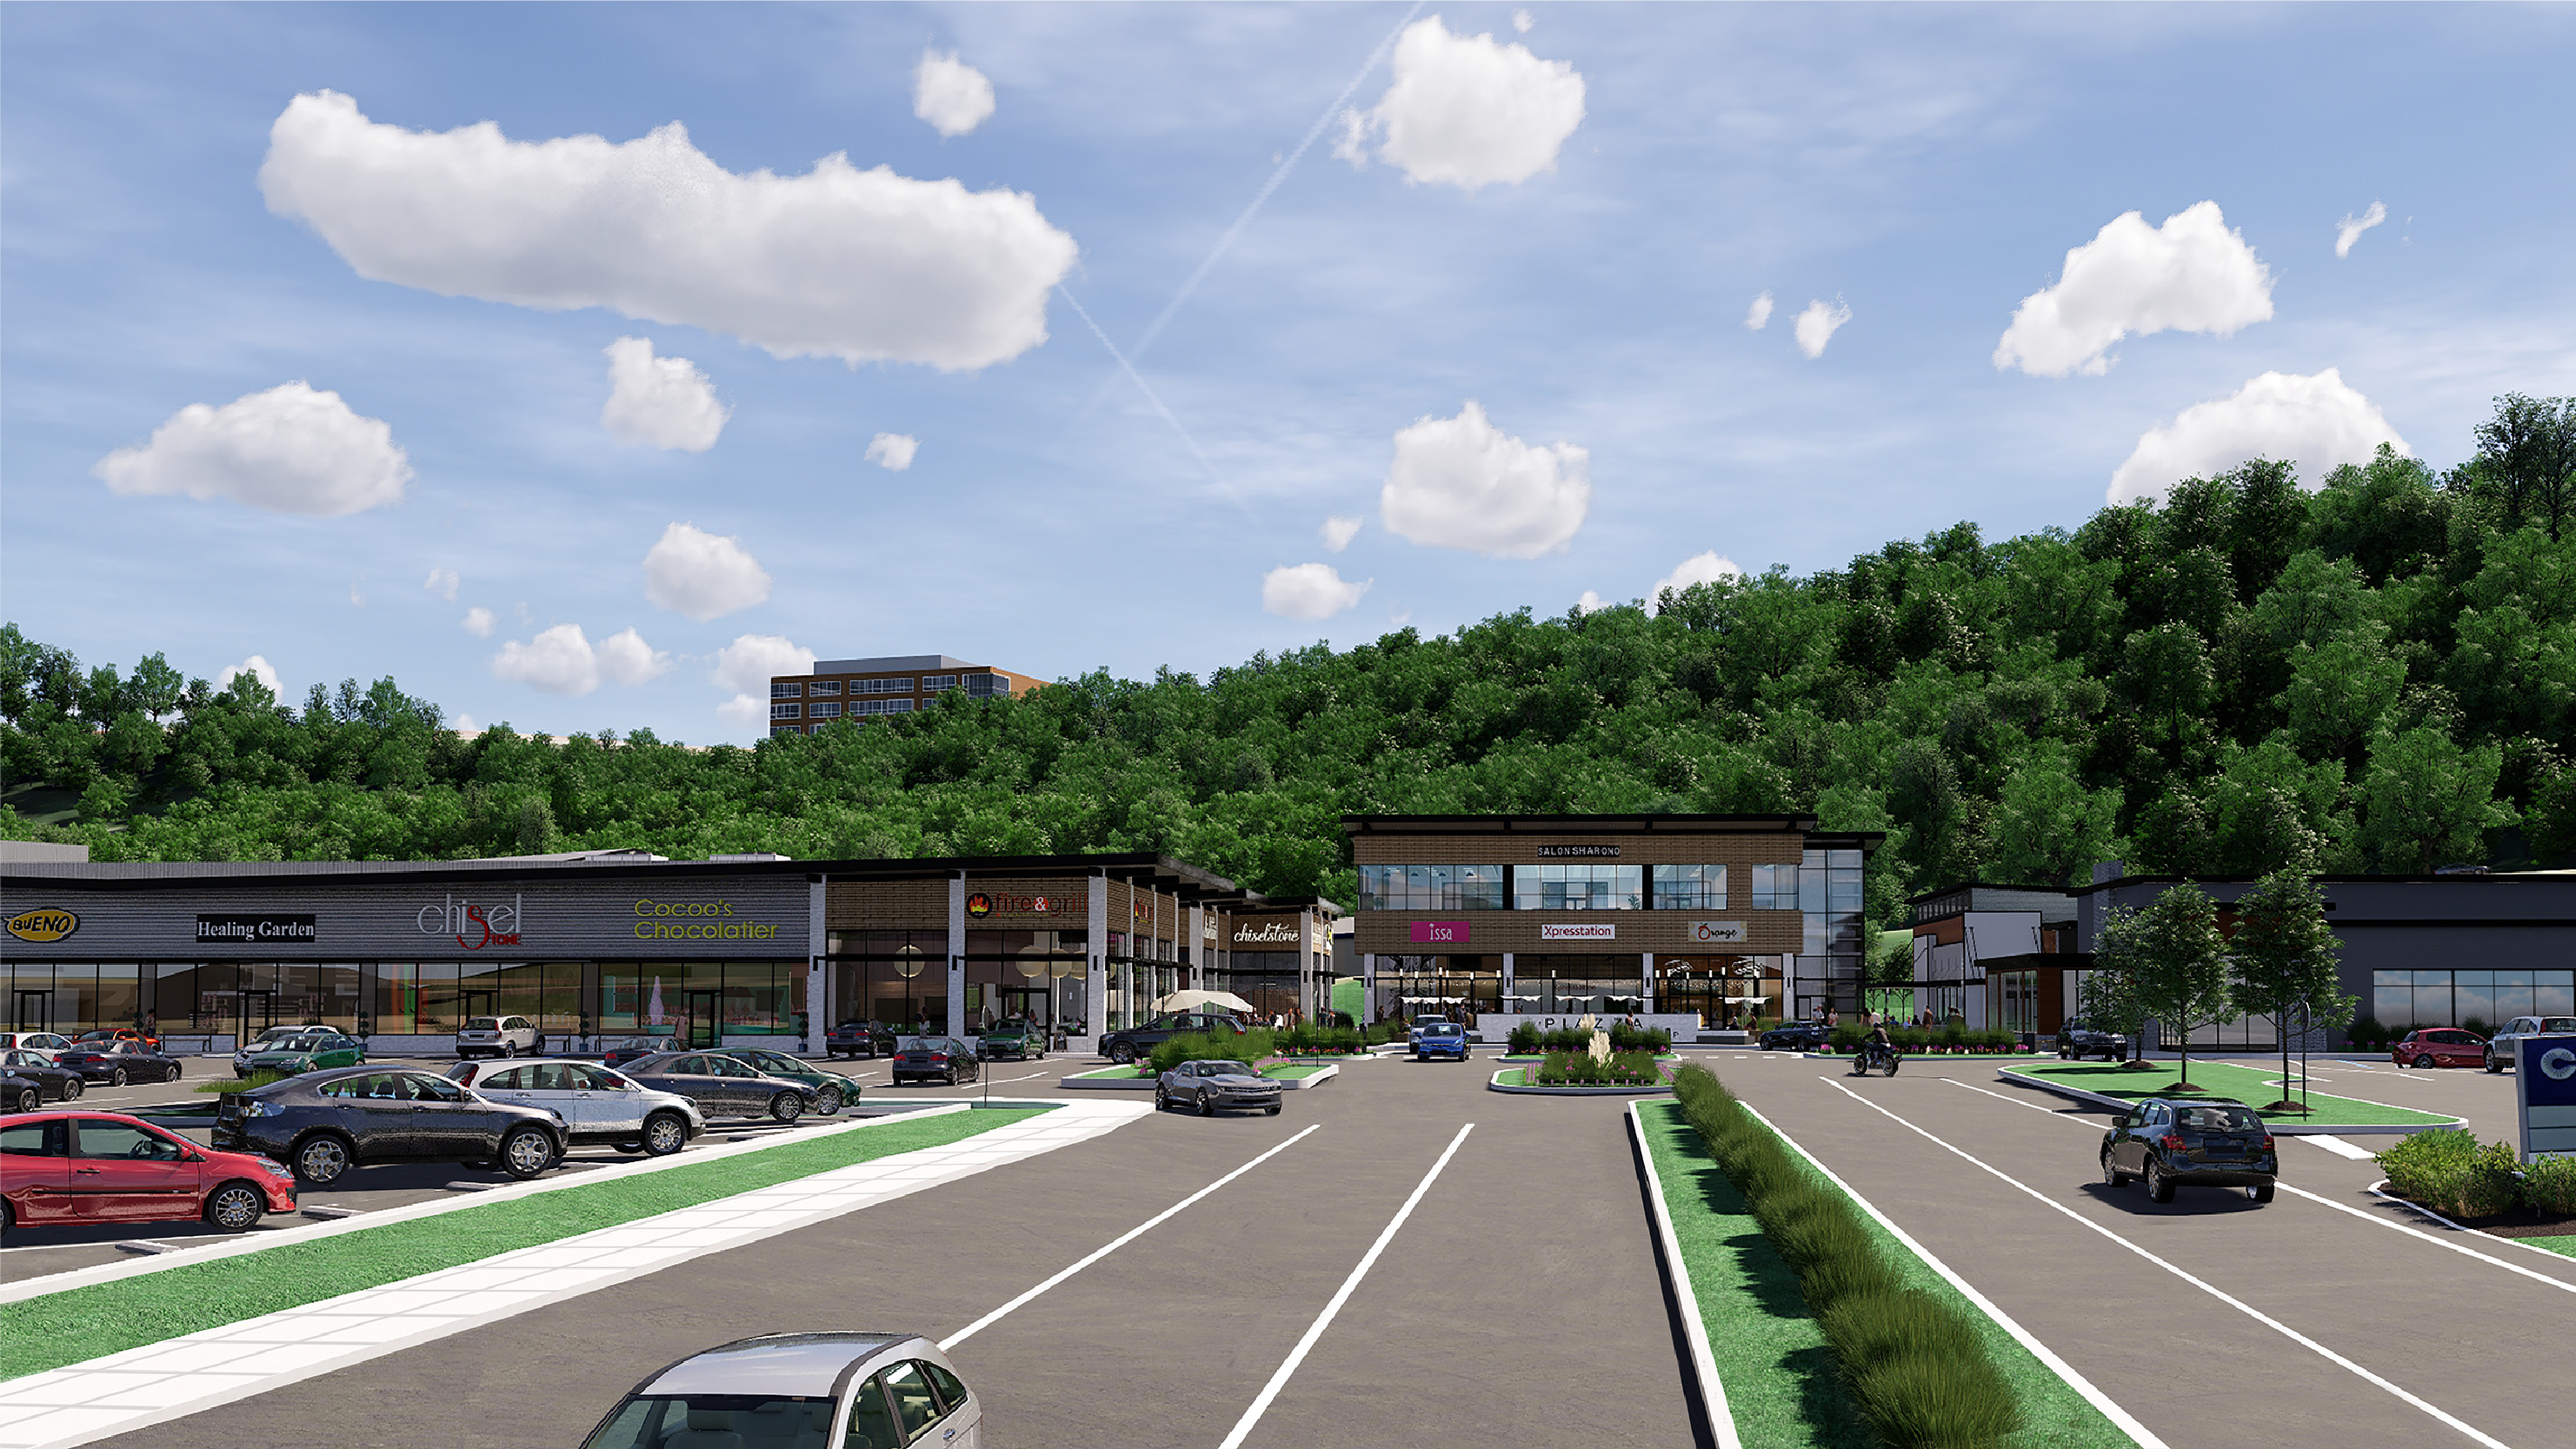 Digital rendering of The Piazza shopping plaza with parked cars in its lot, and a hill with trees behind it